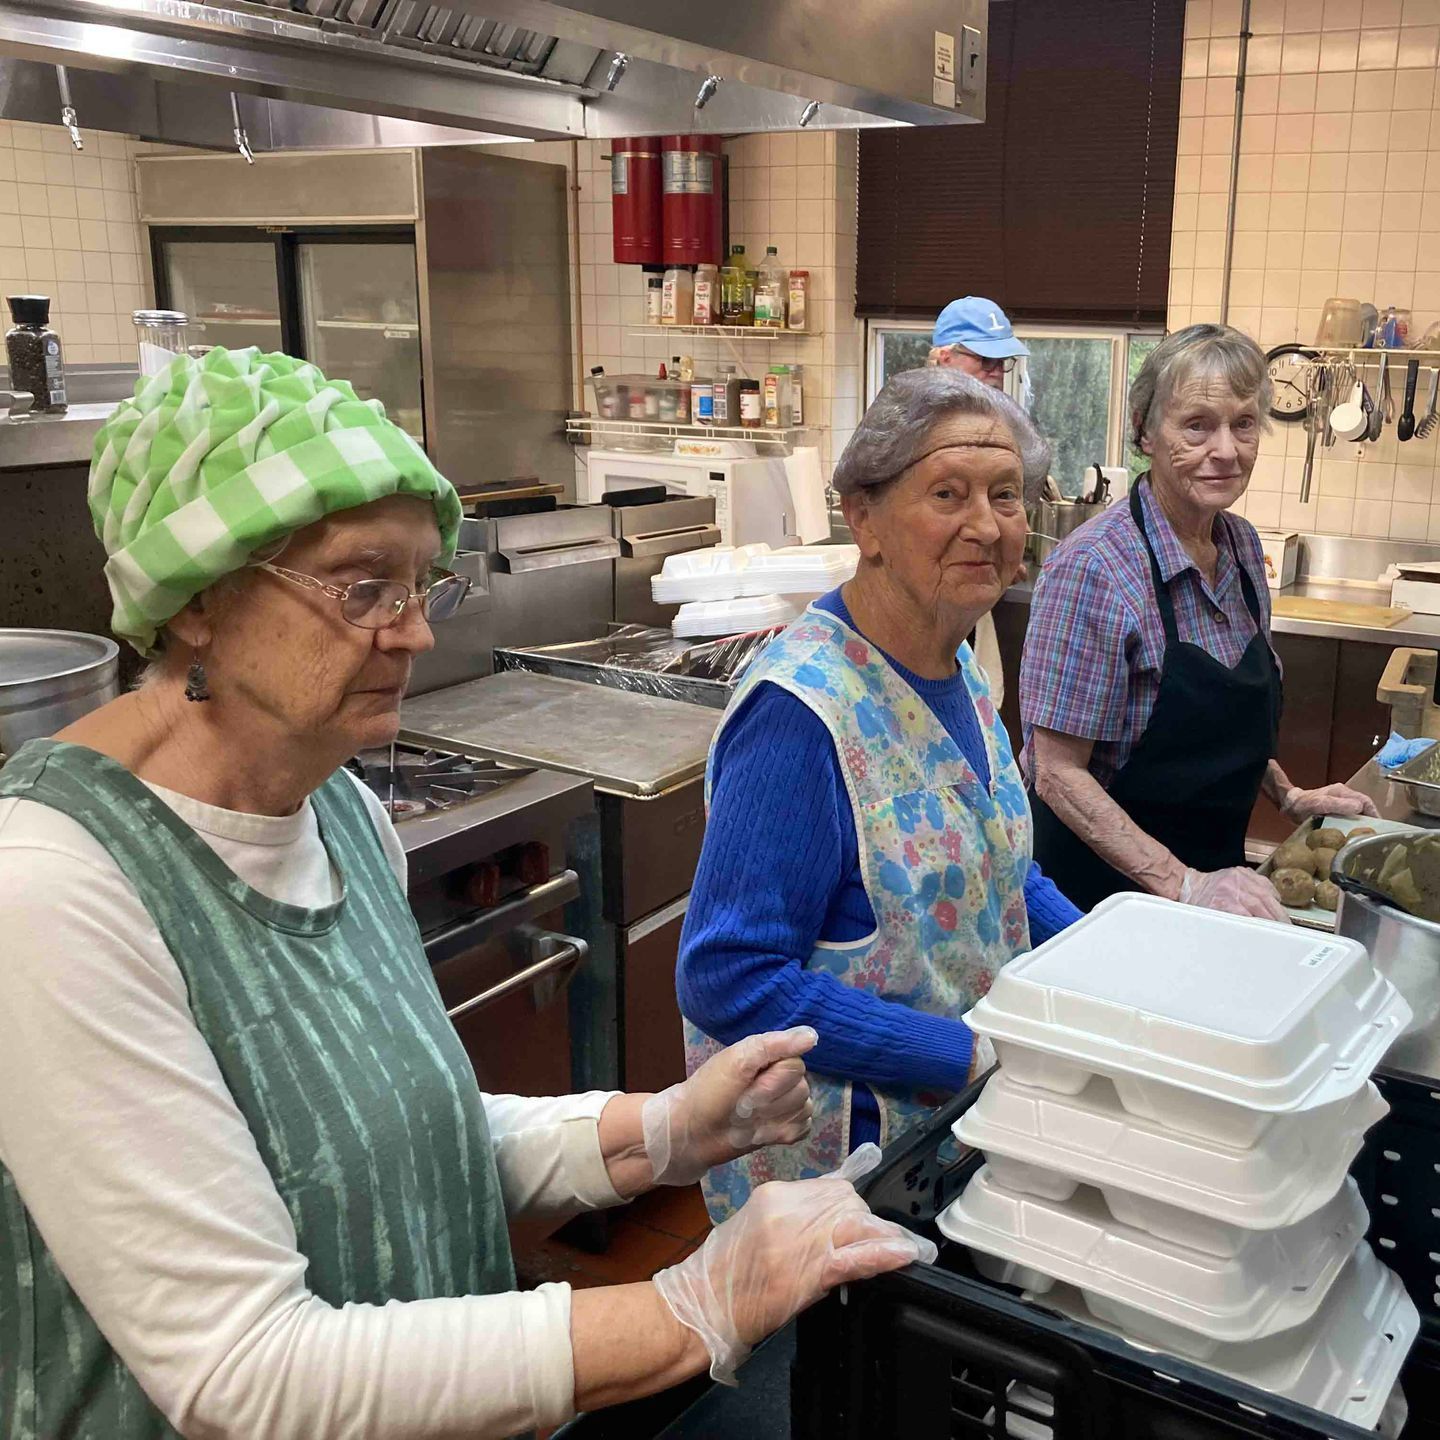 A group of women are standing in a kitchen preparing food.